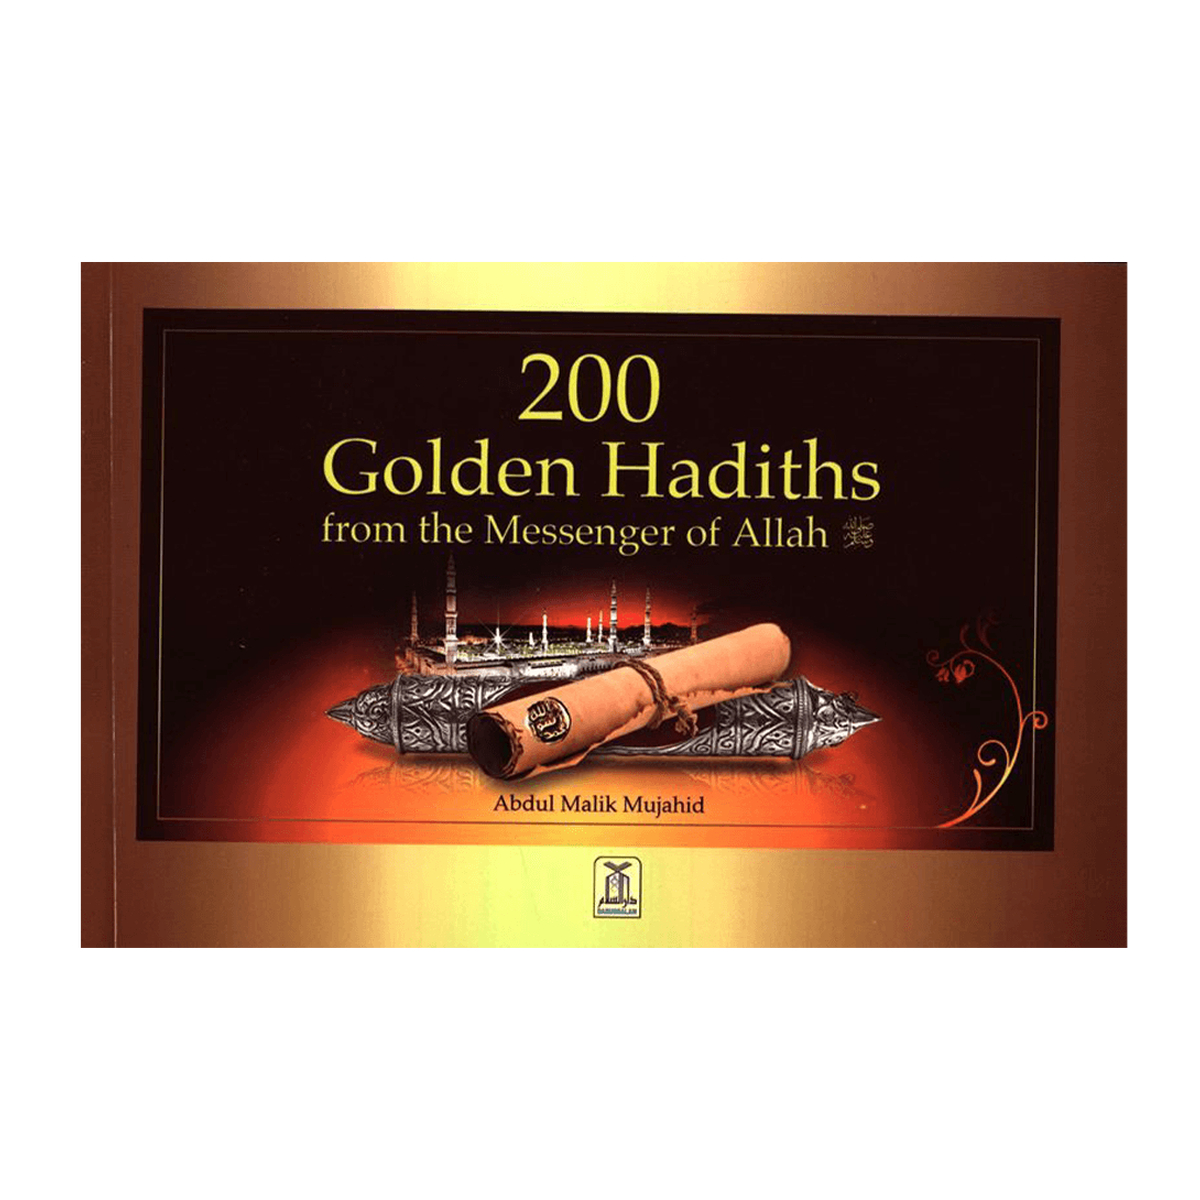 200 Golden Hadiths From the Messenger of Allah